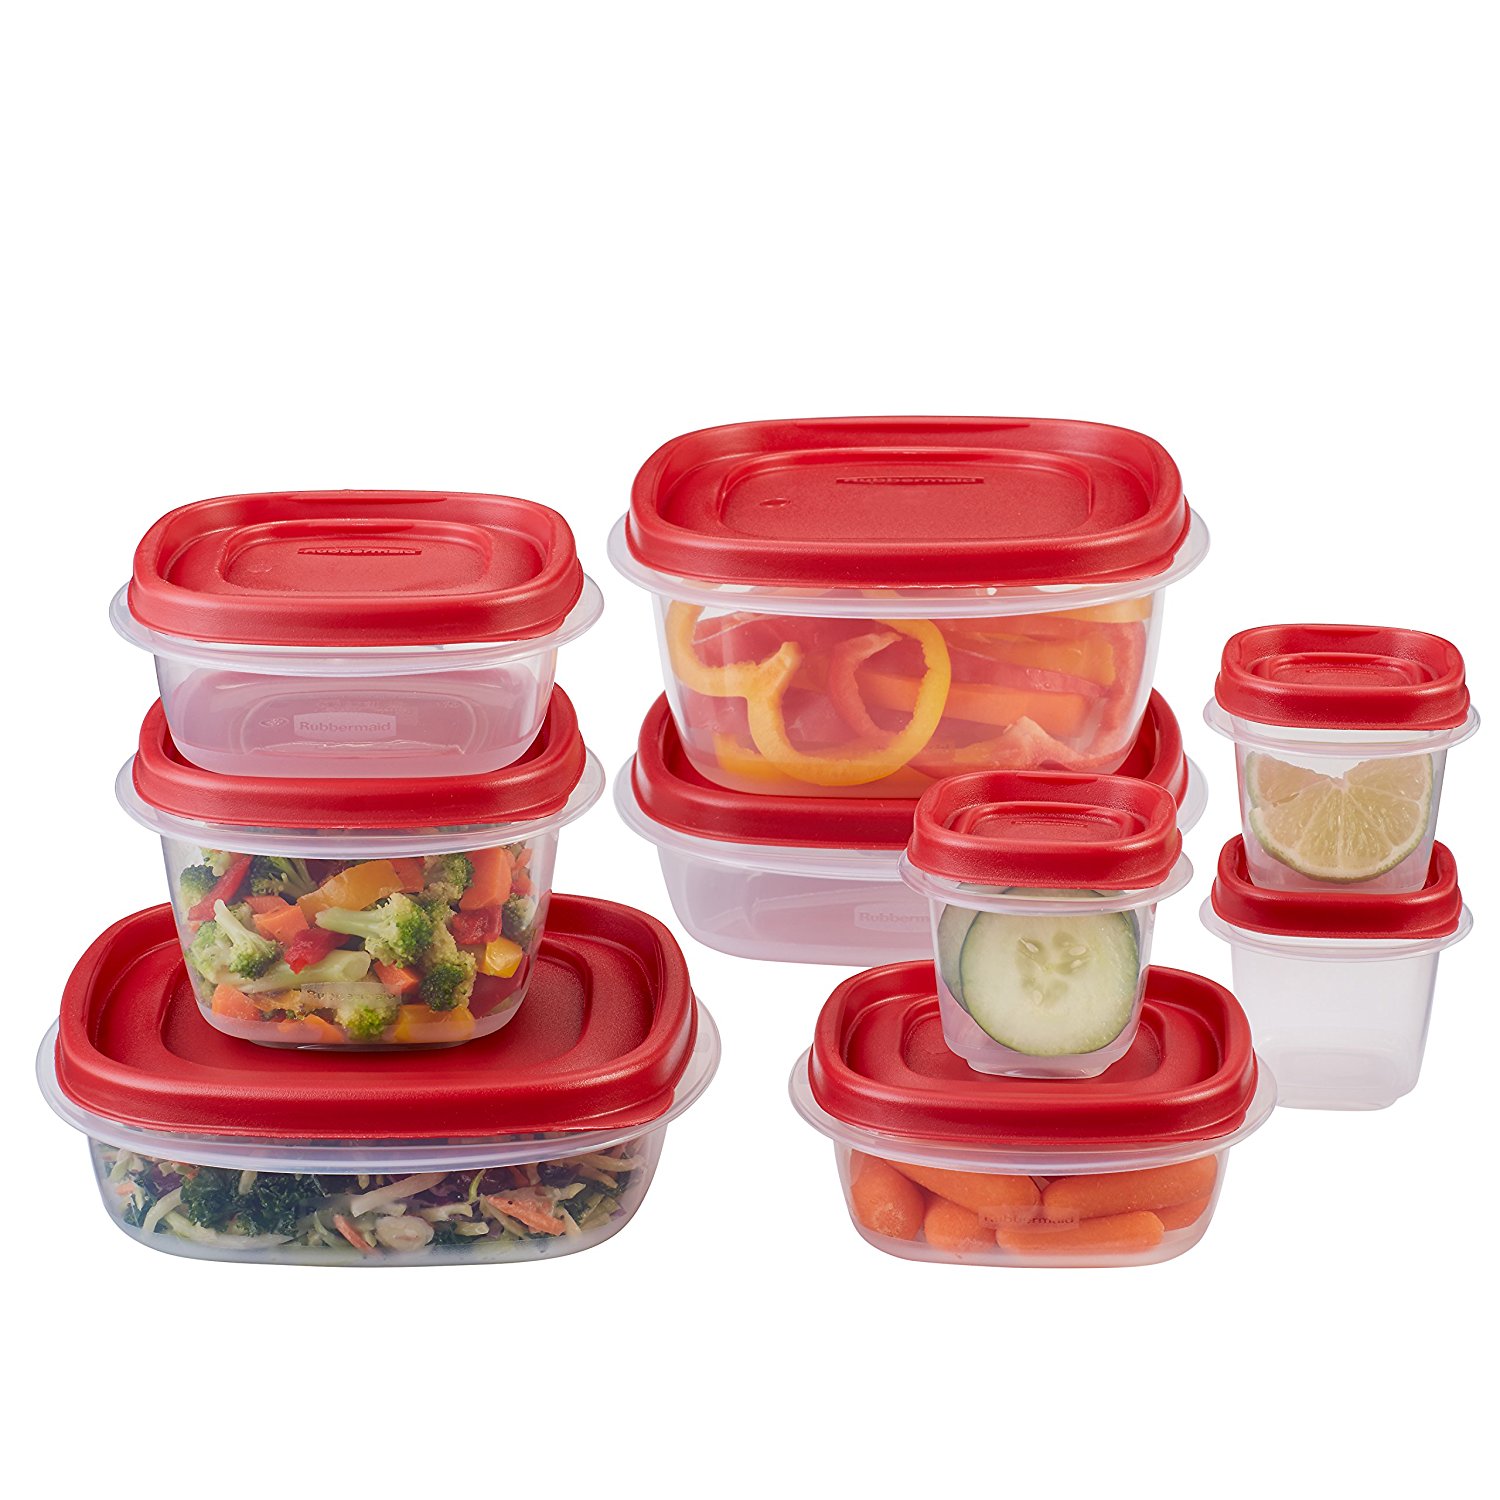 Rubbermaid Easy Find Lids Food Storage Container, 18-Piece Set – Just $11.19!